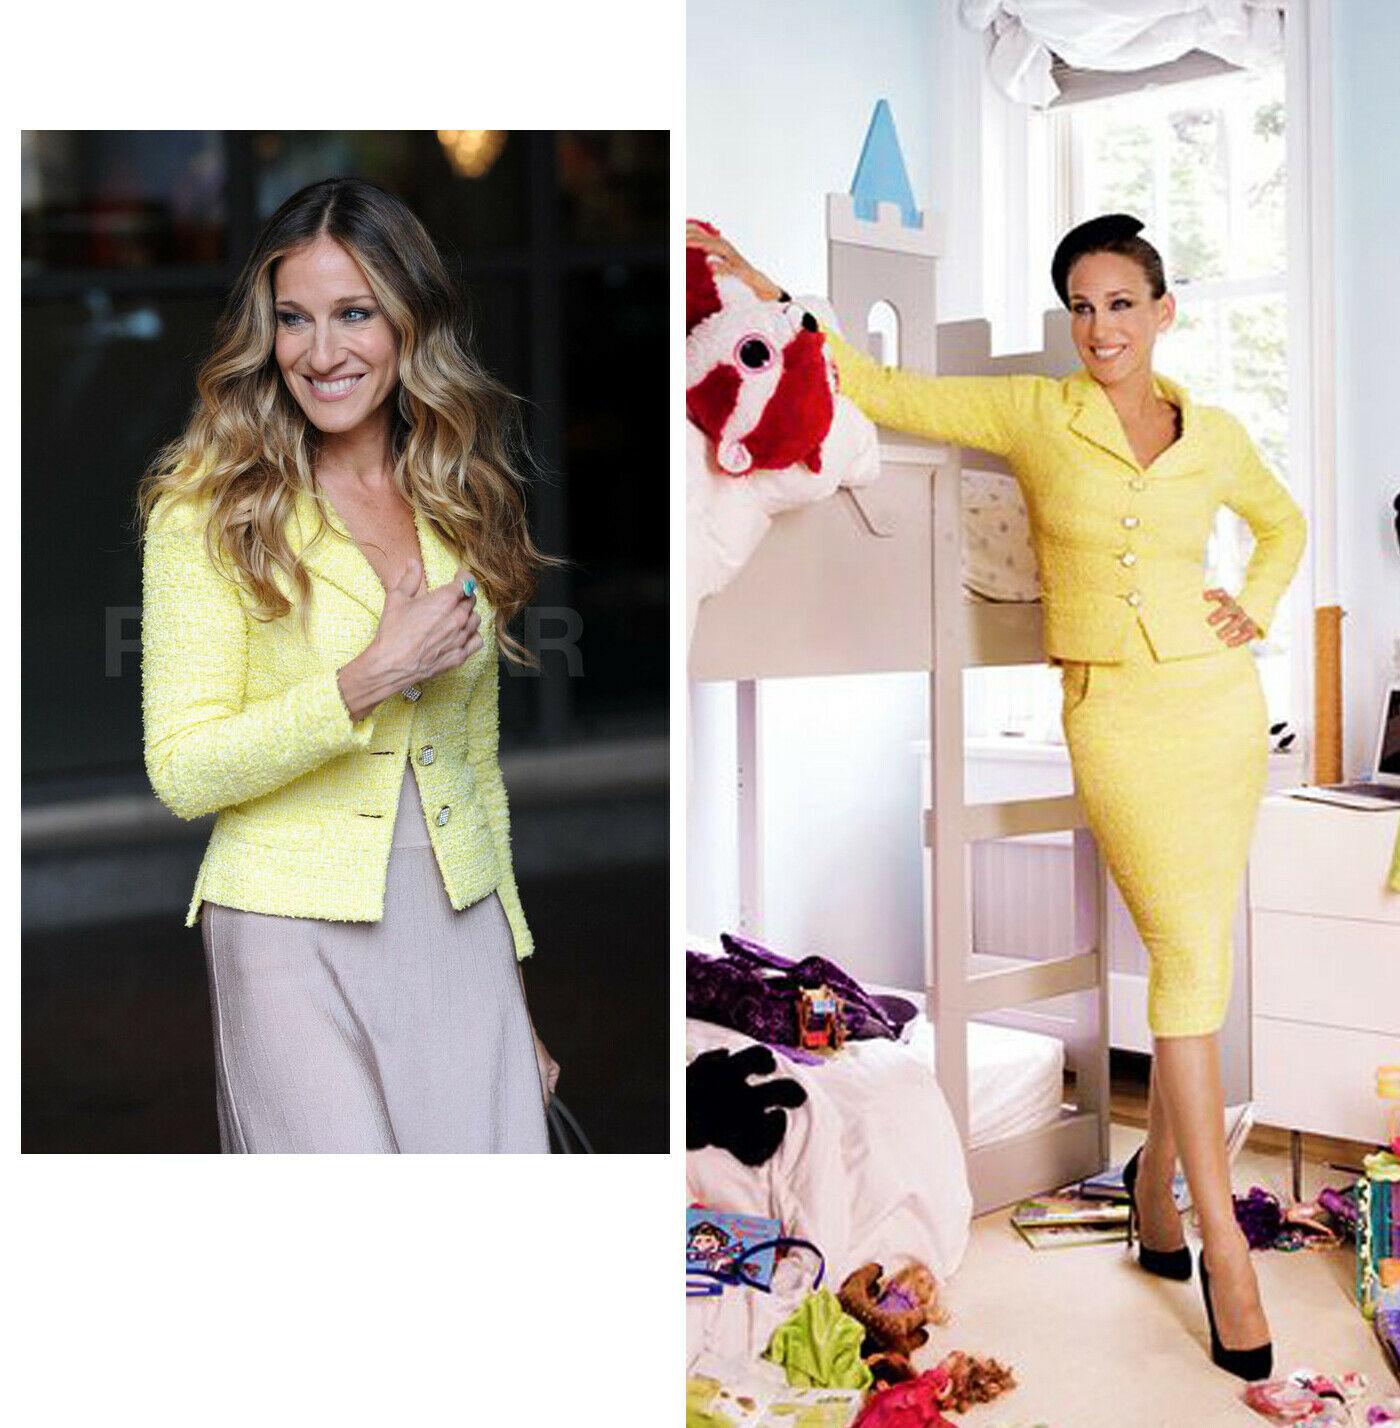 Stunning and recognisable Chanel yellow ribbon tweed suit - as seen on Sarah Jessica Parker!
From Catwalk of La Riviera Cruise Collection in Saint-Tropez.
- fabulous CC logo jewel buttons embellished with crystals. 
Size mark for both items 36 fr.